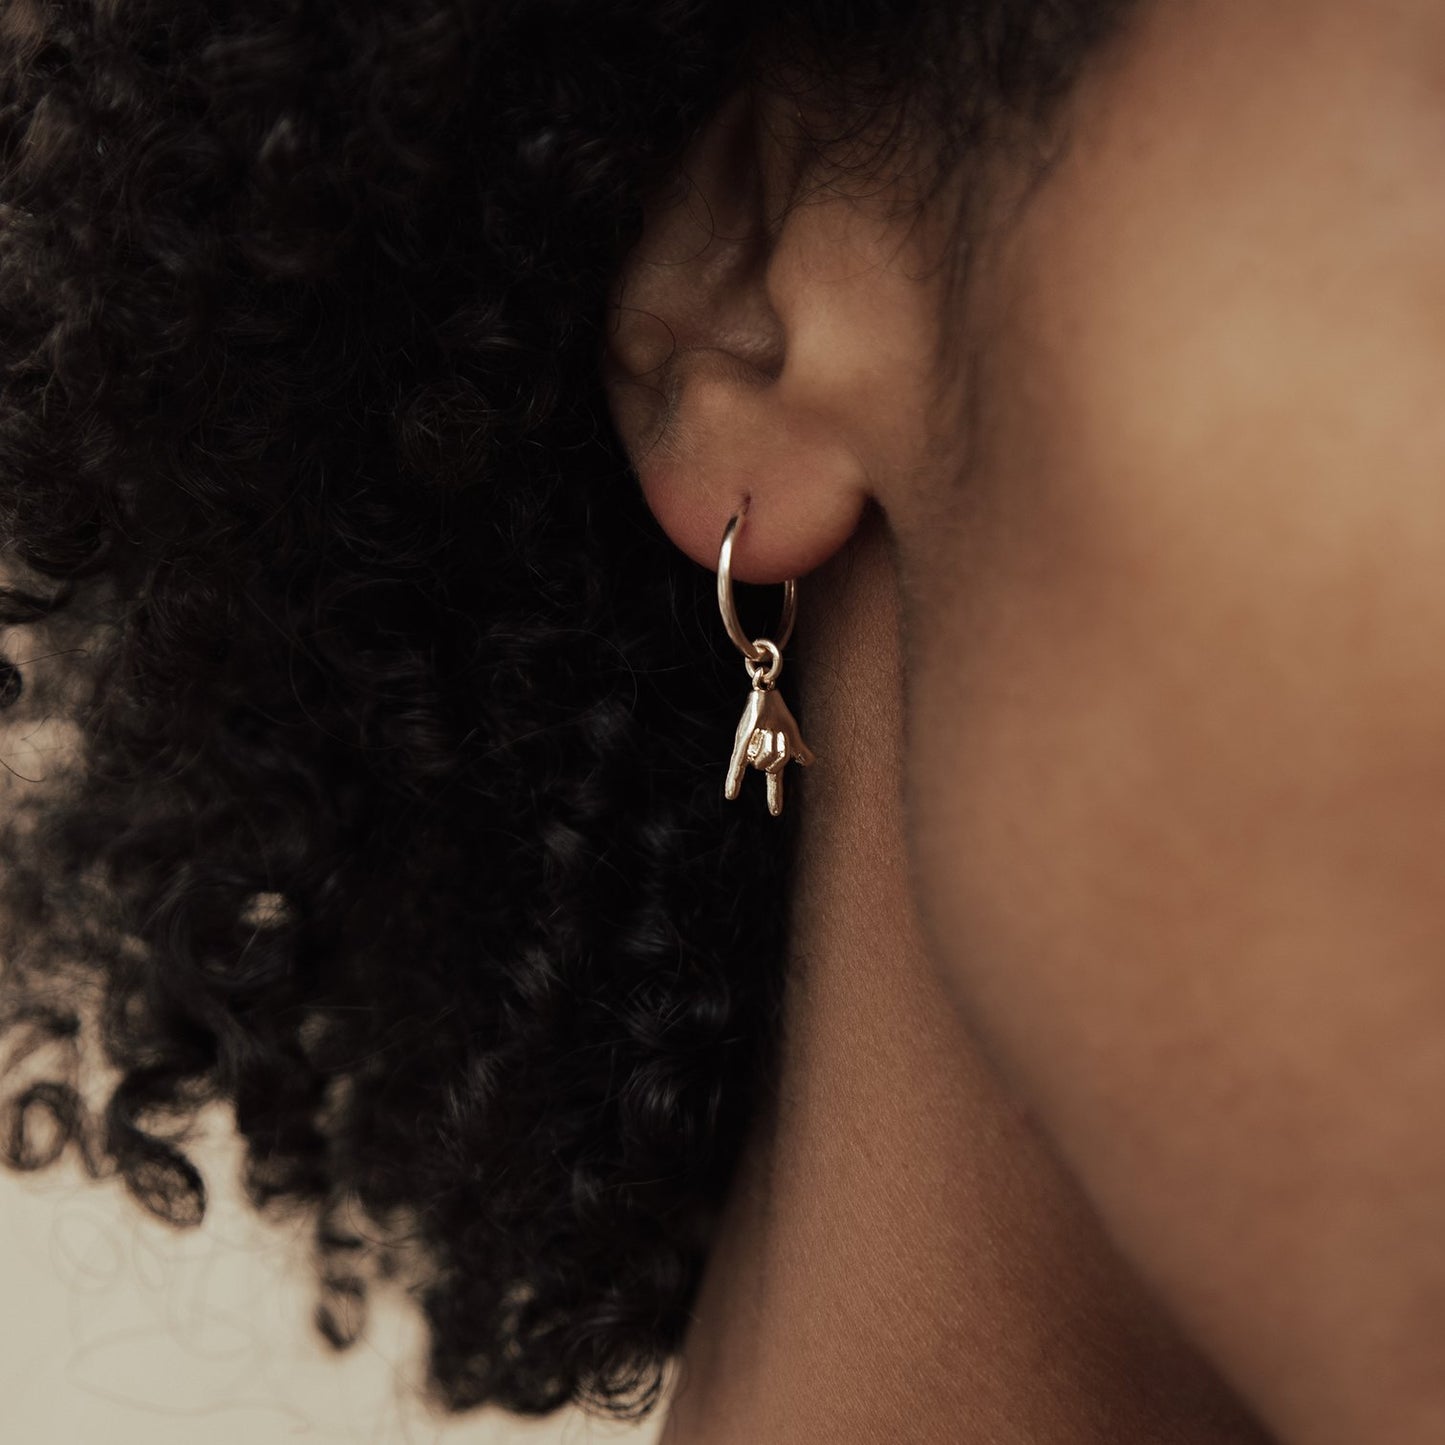 I Love You Charm Earrings by Larissa Loden